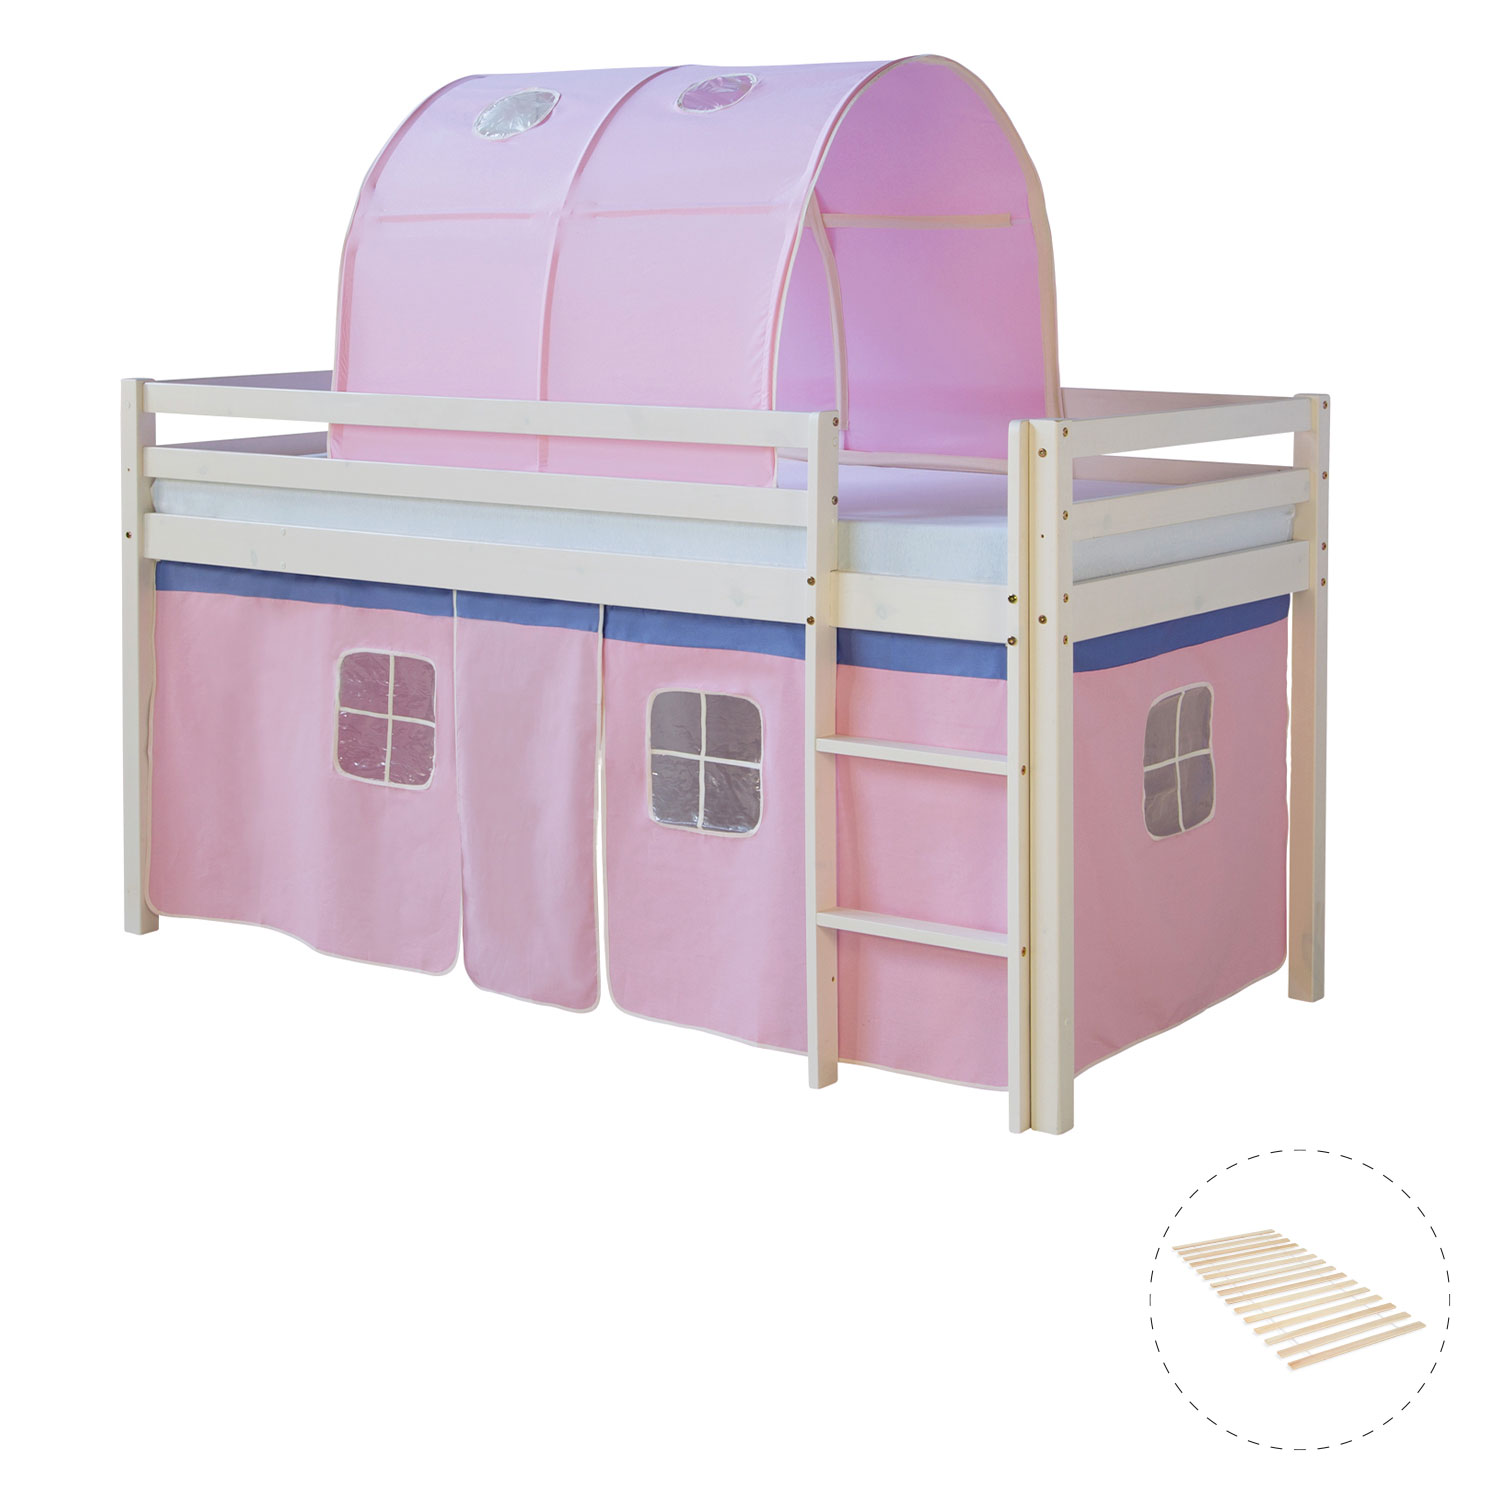 Loftbed 90x200 cm with Slats Bunk bed Childrens bed Tunnel Curtain Pink Solid Pine Wood